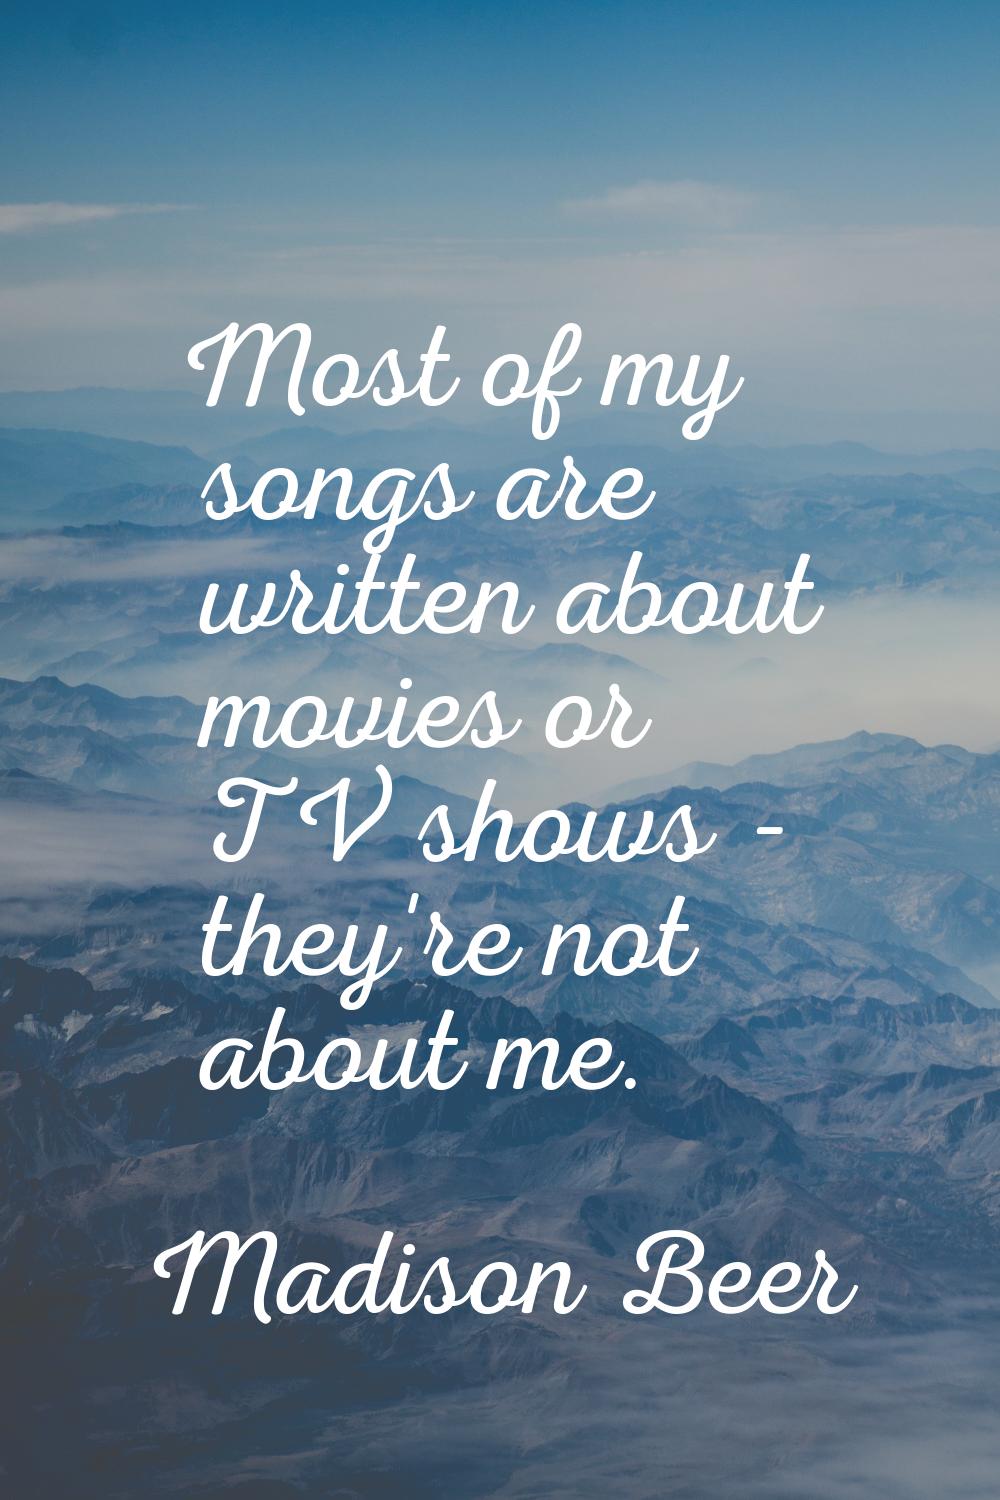 Most of my songs are written about movies or TV shows - they're not about me.